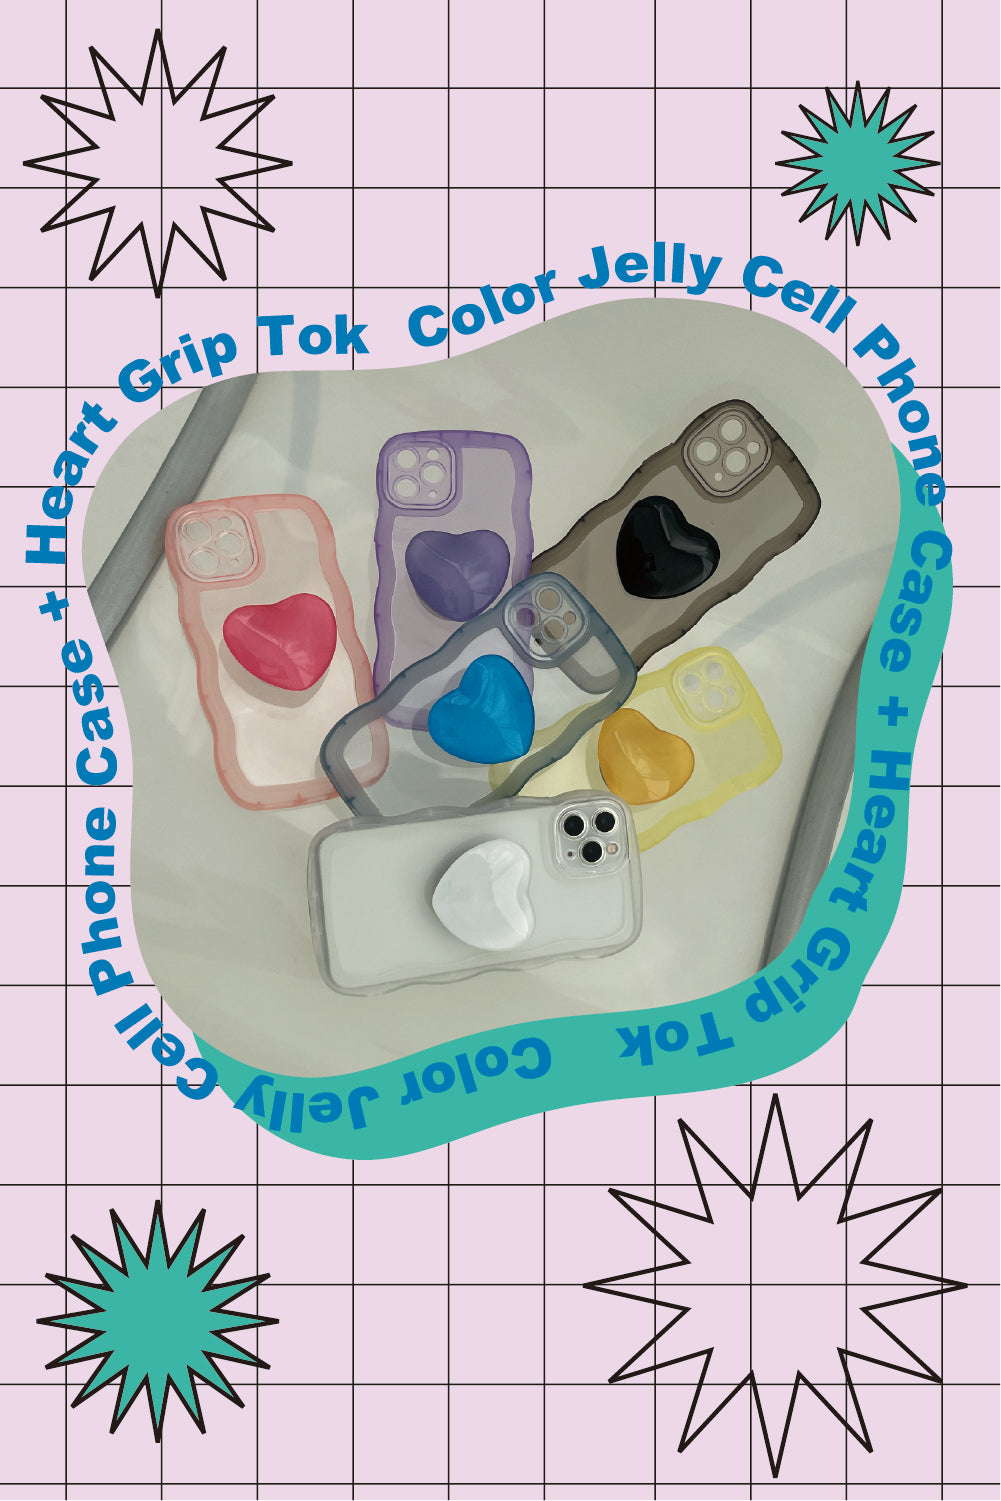 Color Jelly iPhone Case + Heart Grip Tok(カラージェリーアイフォンケース+ハートグリップトック)